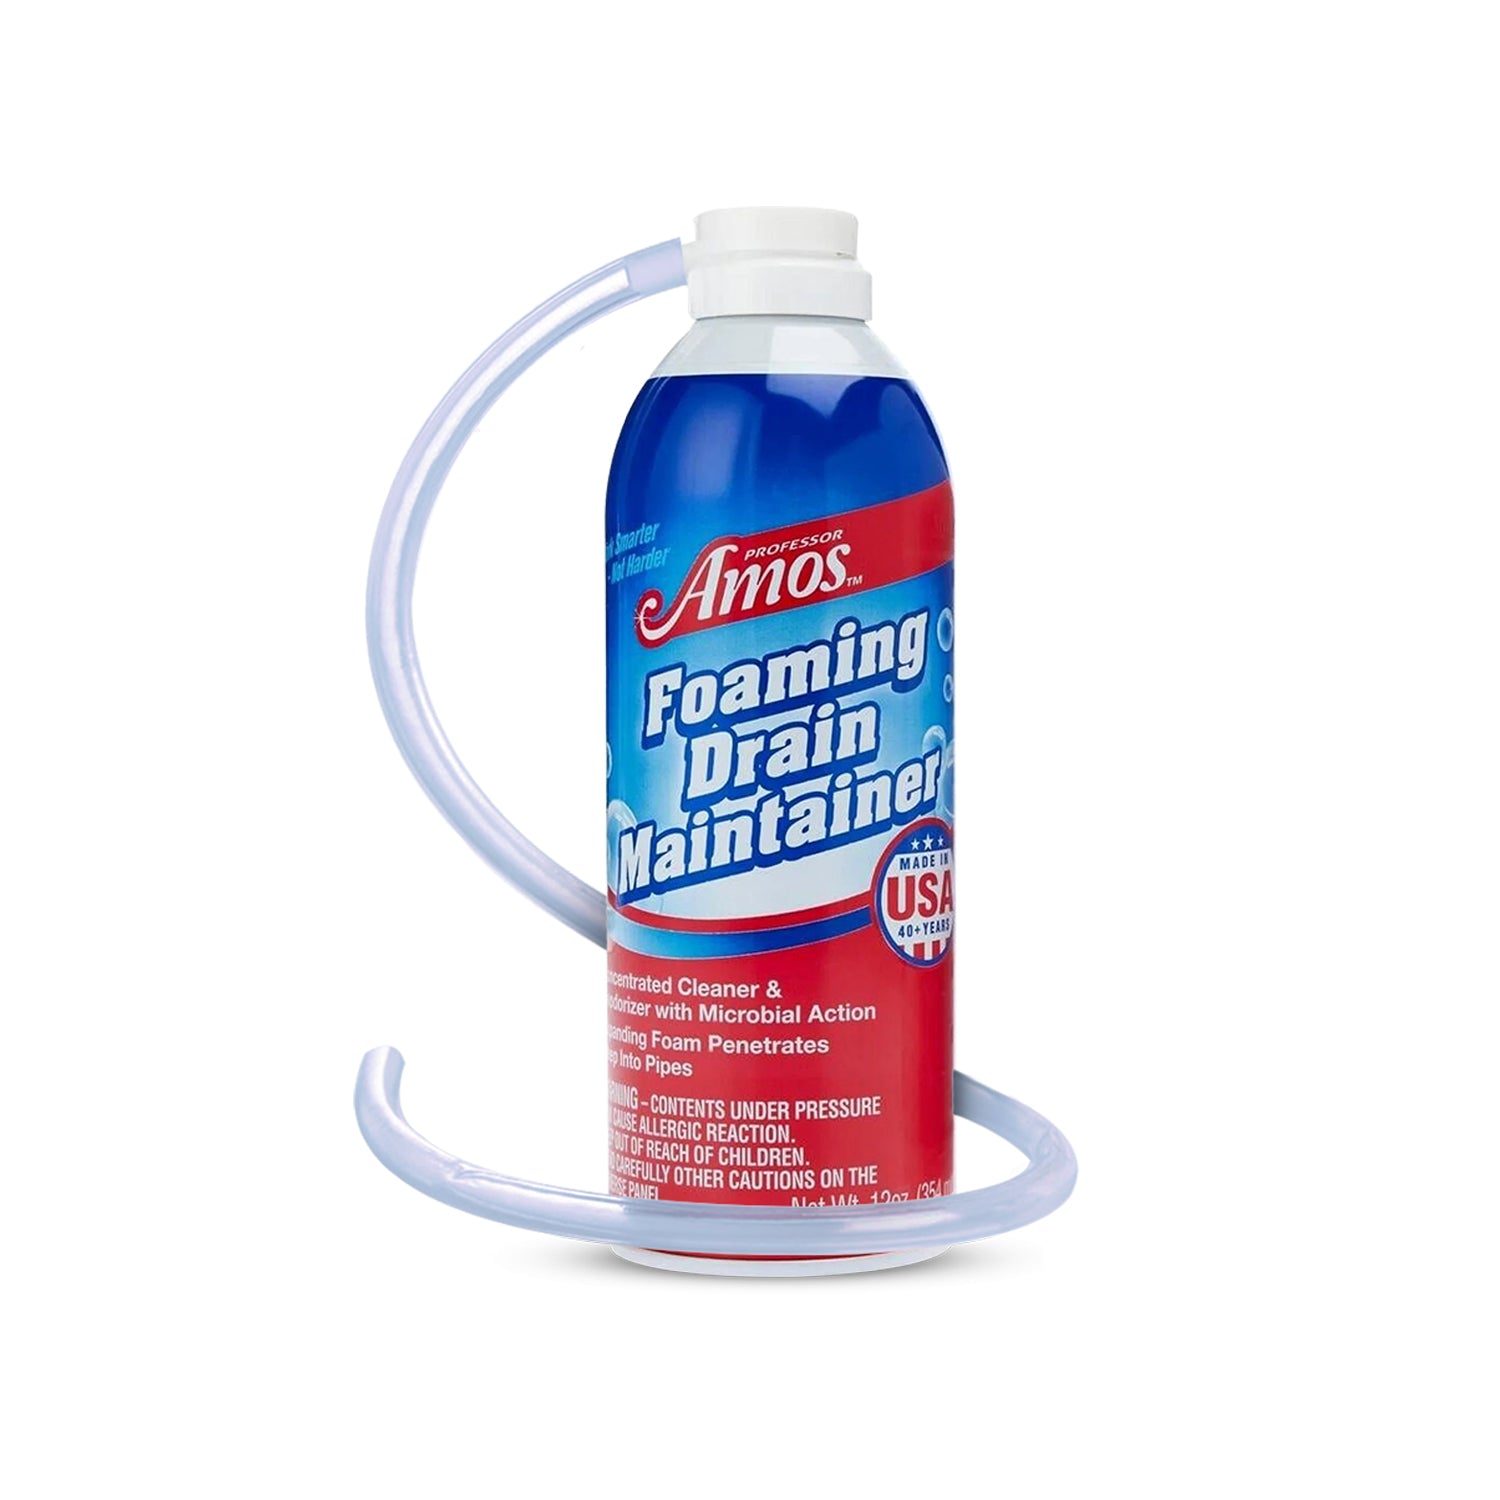 Herios Drain Cleaner,Powerful Sink and Drain Cleaner Fast Foaming